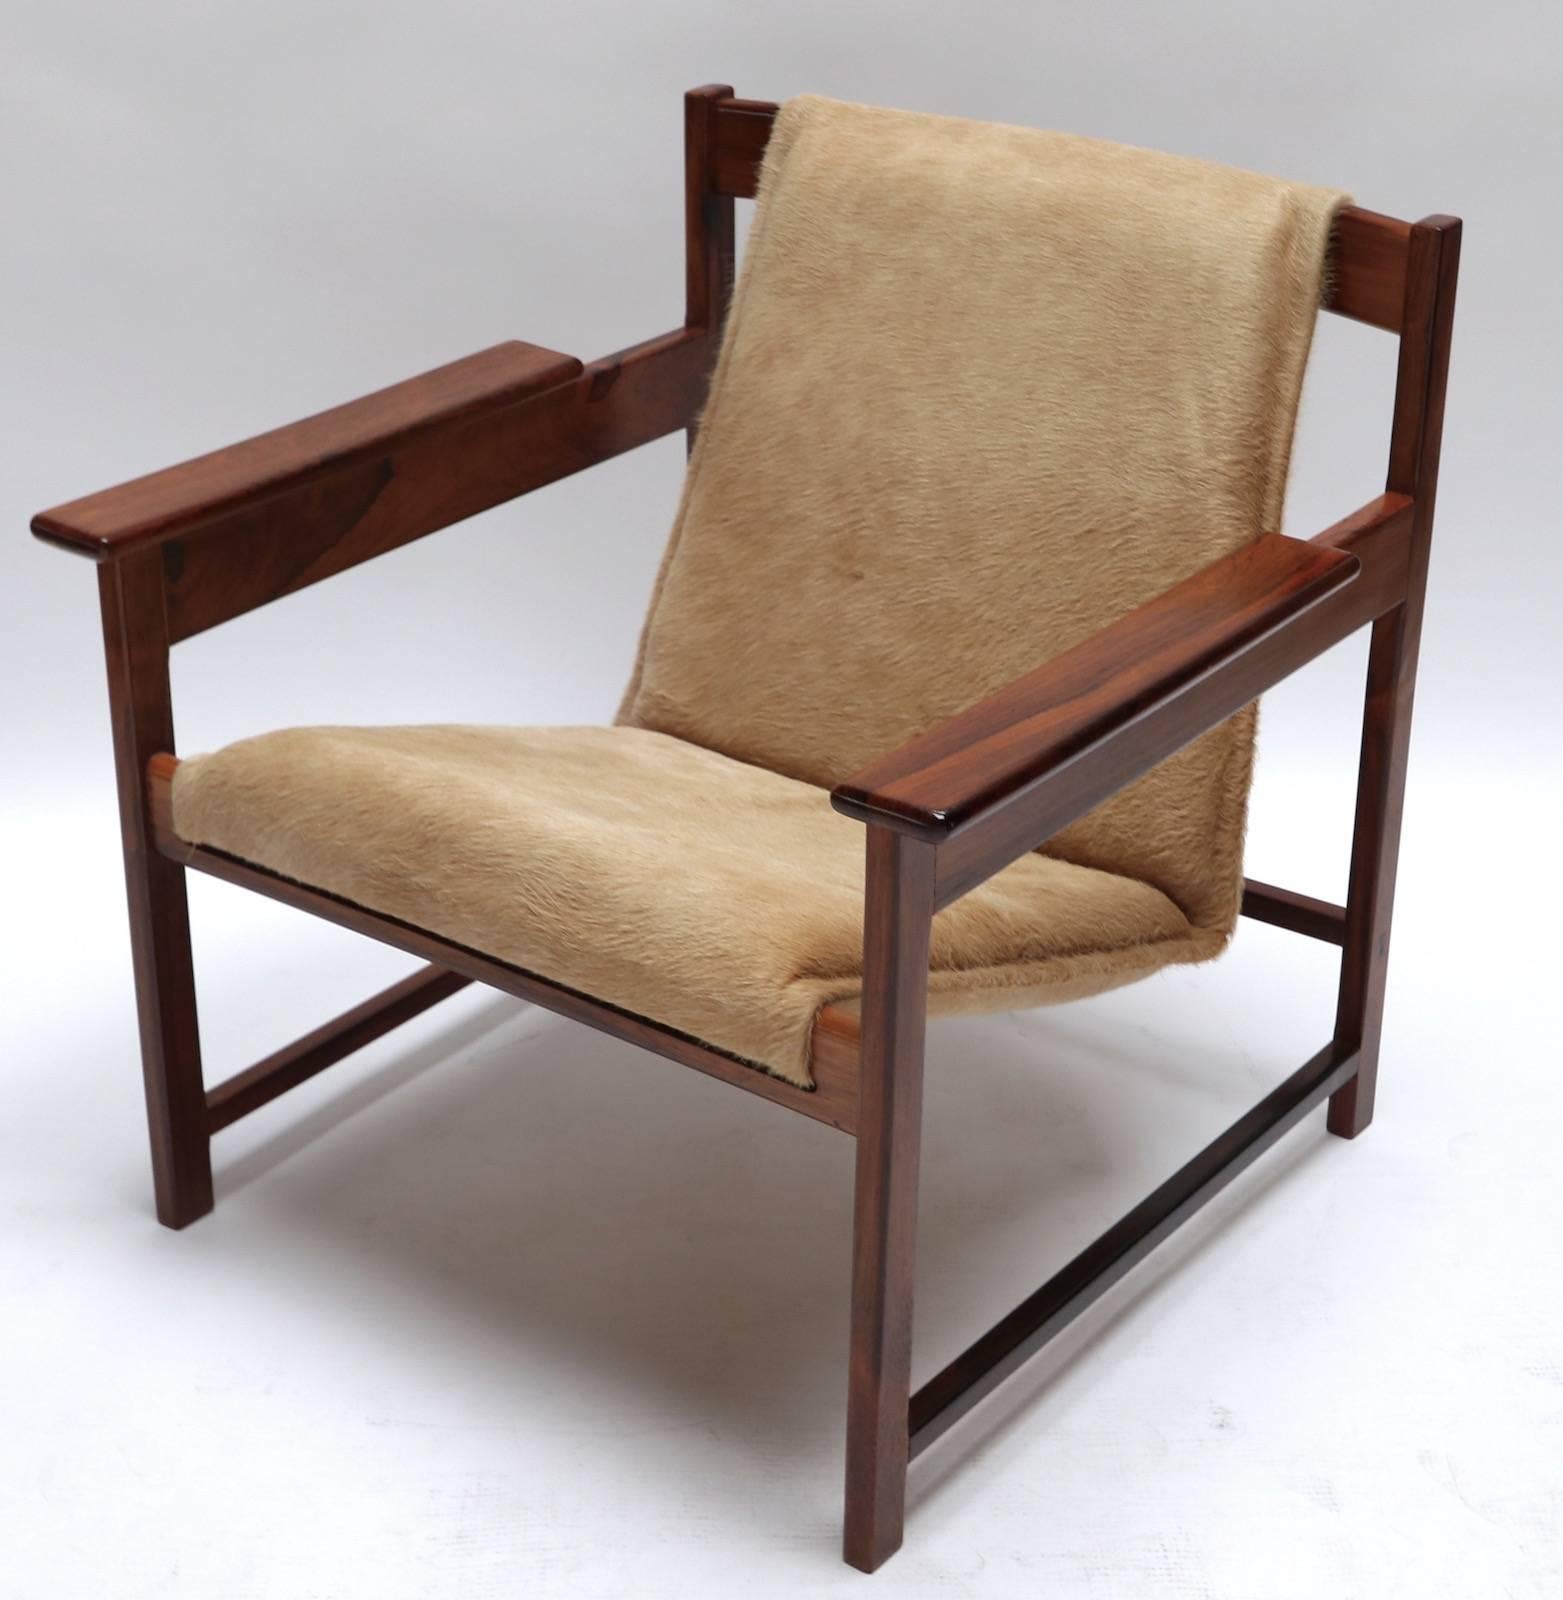 Pair of Sergio Rodrigues Lia chairs from the 1960s made of Brazilian jacaranda and upholstered in beige cowhide.